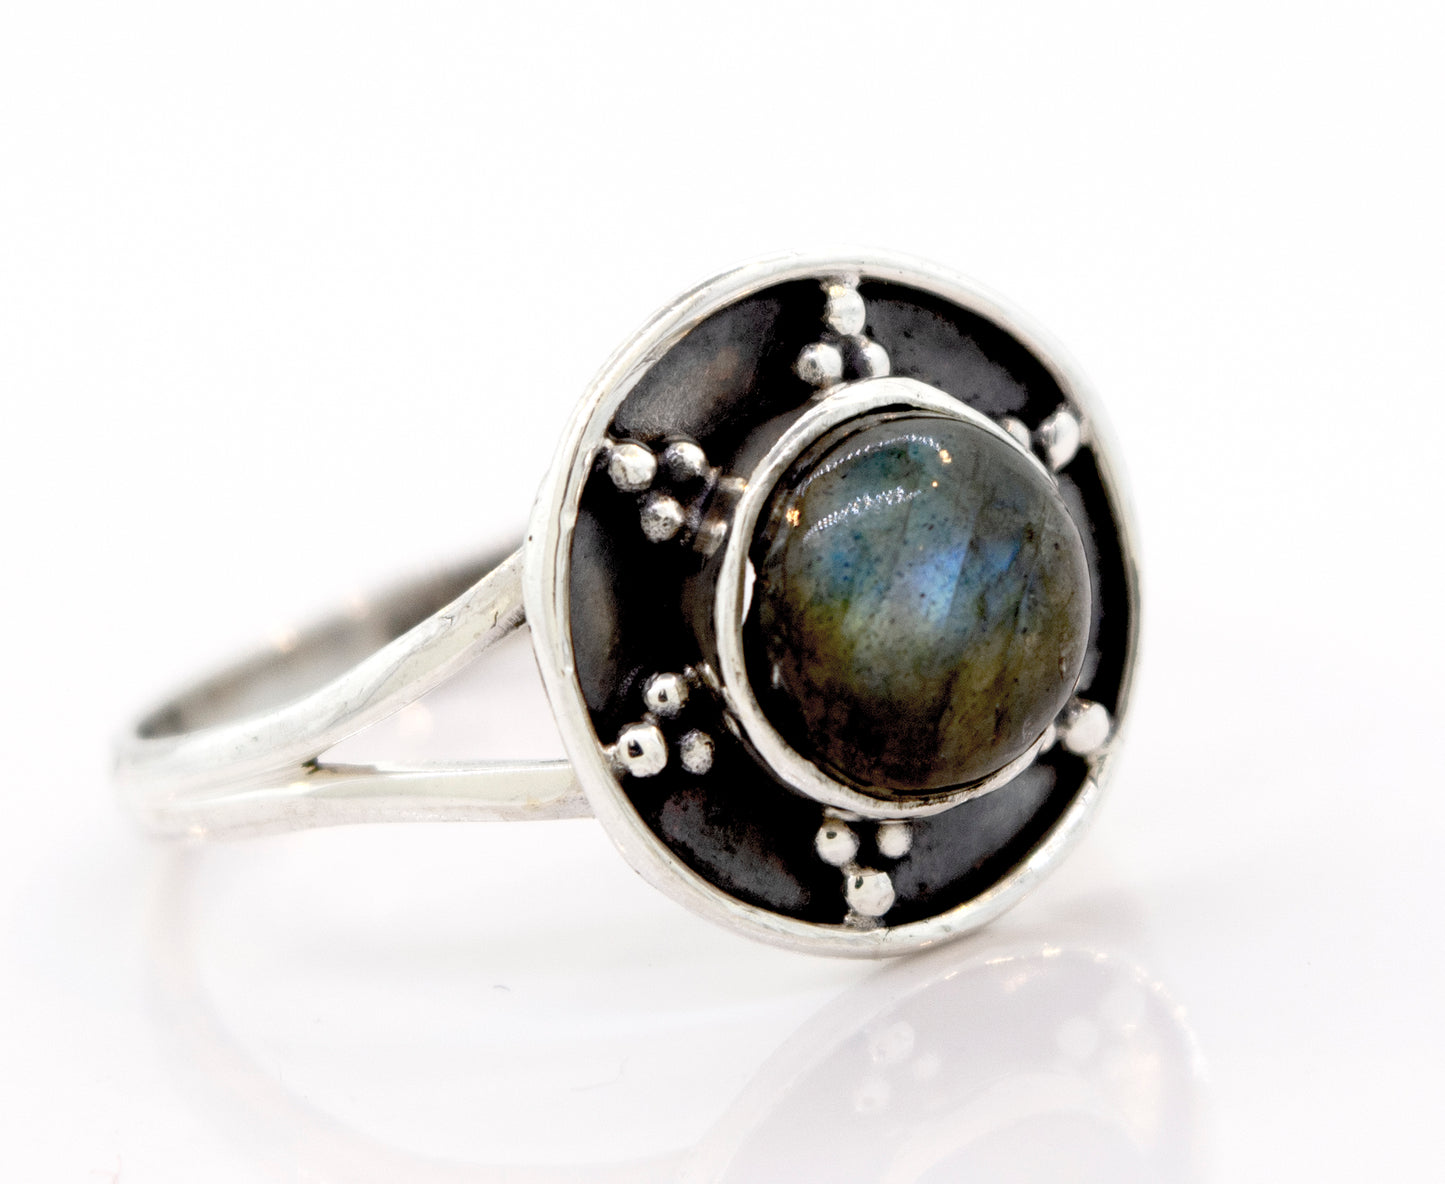 
                  
                    A Gemstone Ring With Unique Oxidized Design featuring a round, dark gemstone at its center, surrounded by an intricate oxidized silver design with small bead accents.
                  
                